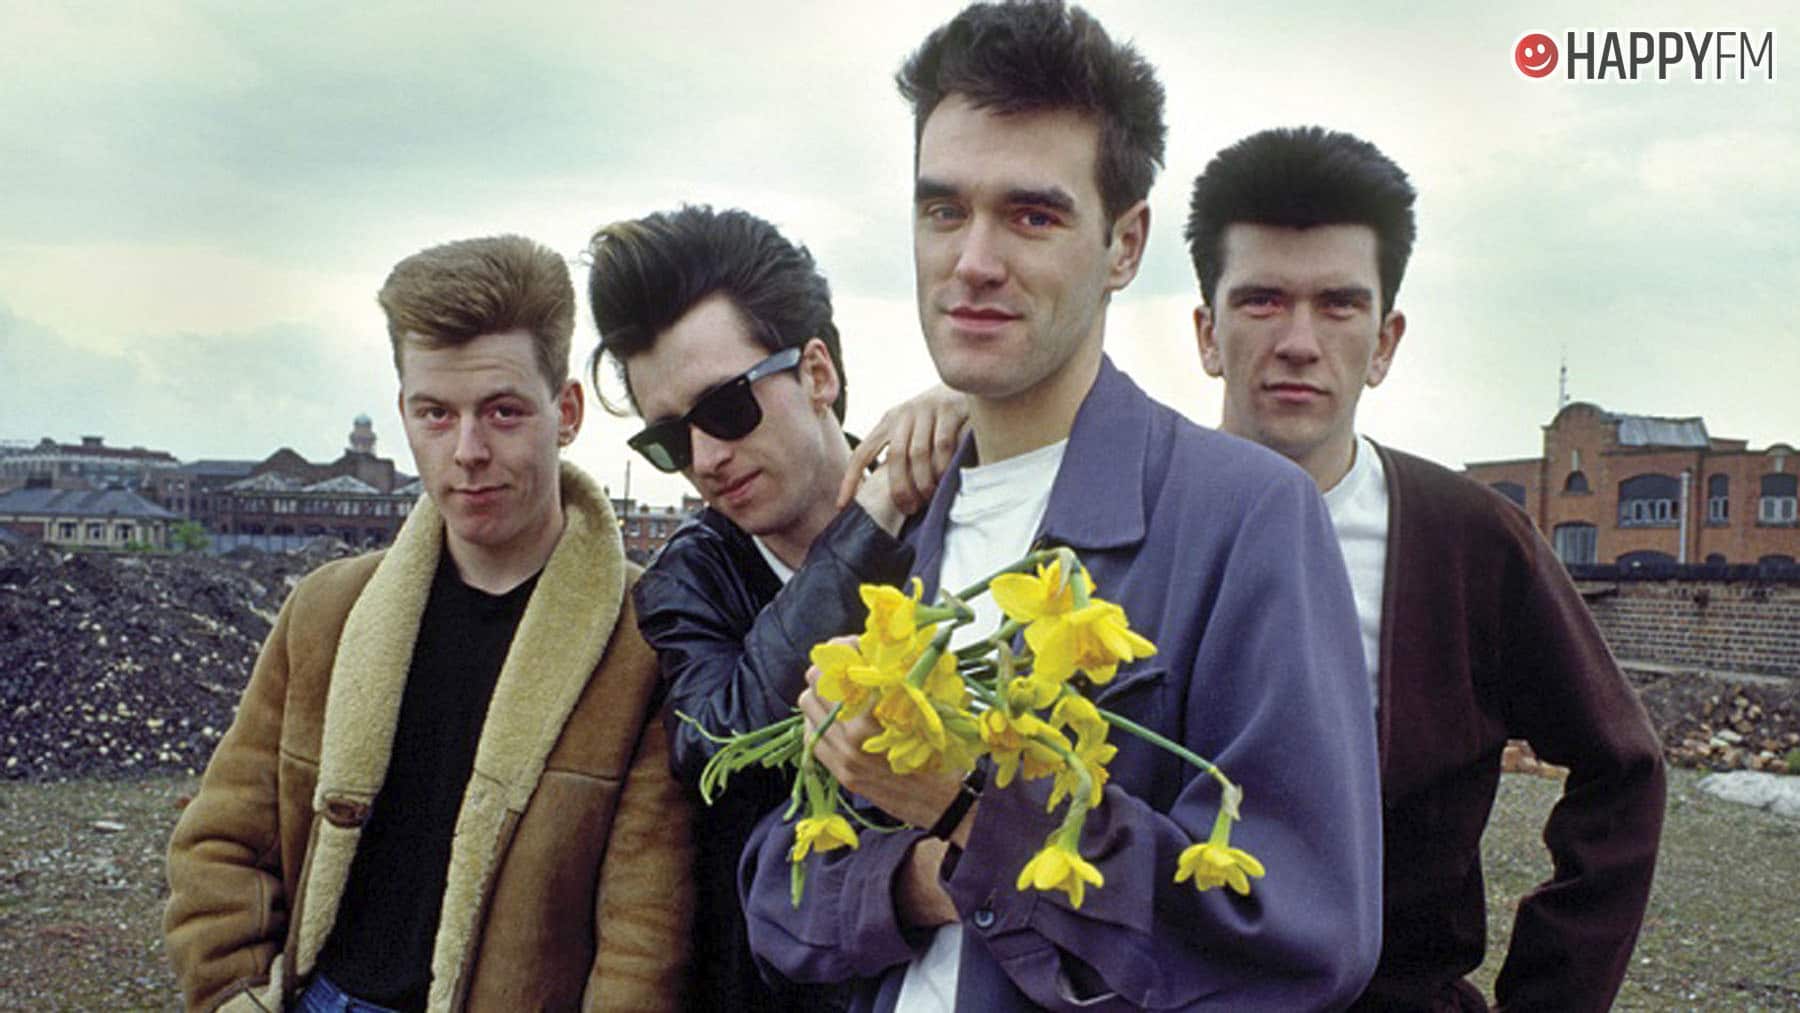 ‘There Is a Light That Never Goes Out’, de The Smiths: letra (en español), historia y vídeo